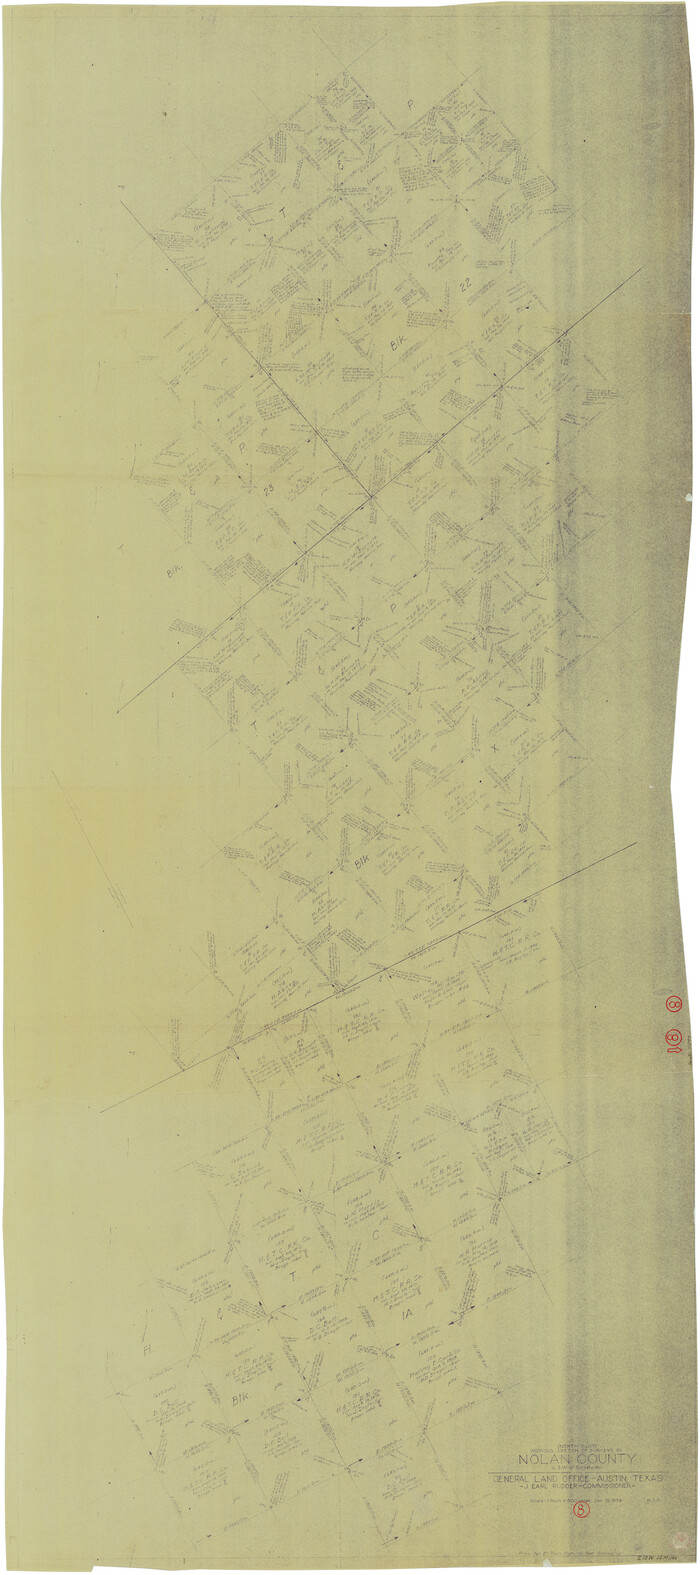 71299, Nolan County Working Sketch 8, General Map Collection